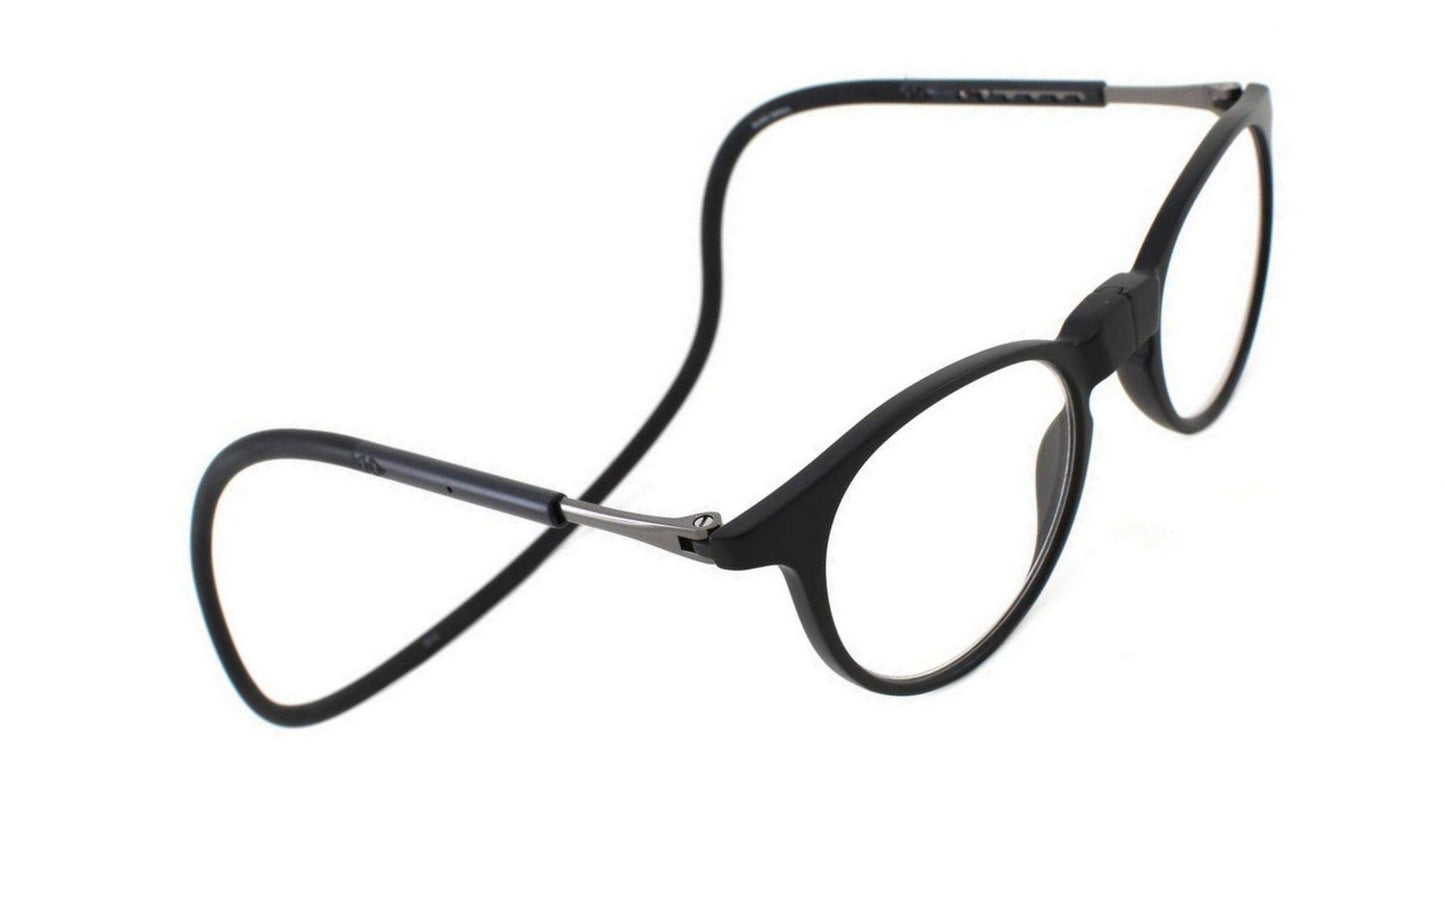 Round Magnetic Easyflex Reading Spectacle Glasses Suitable For Near Vision Color Black